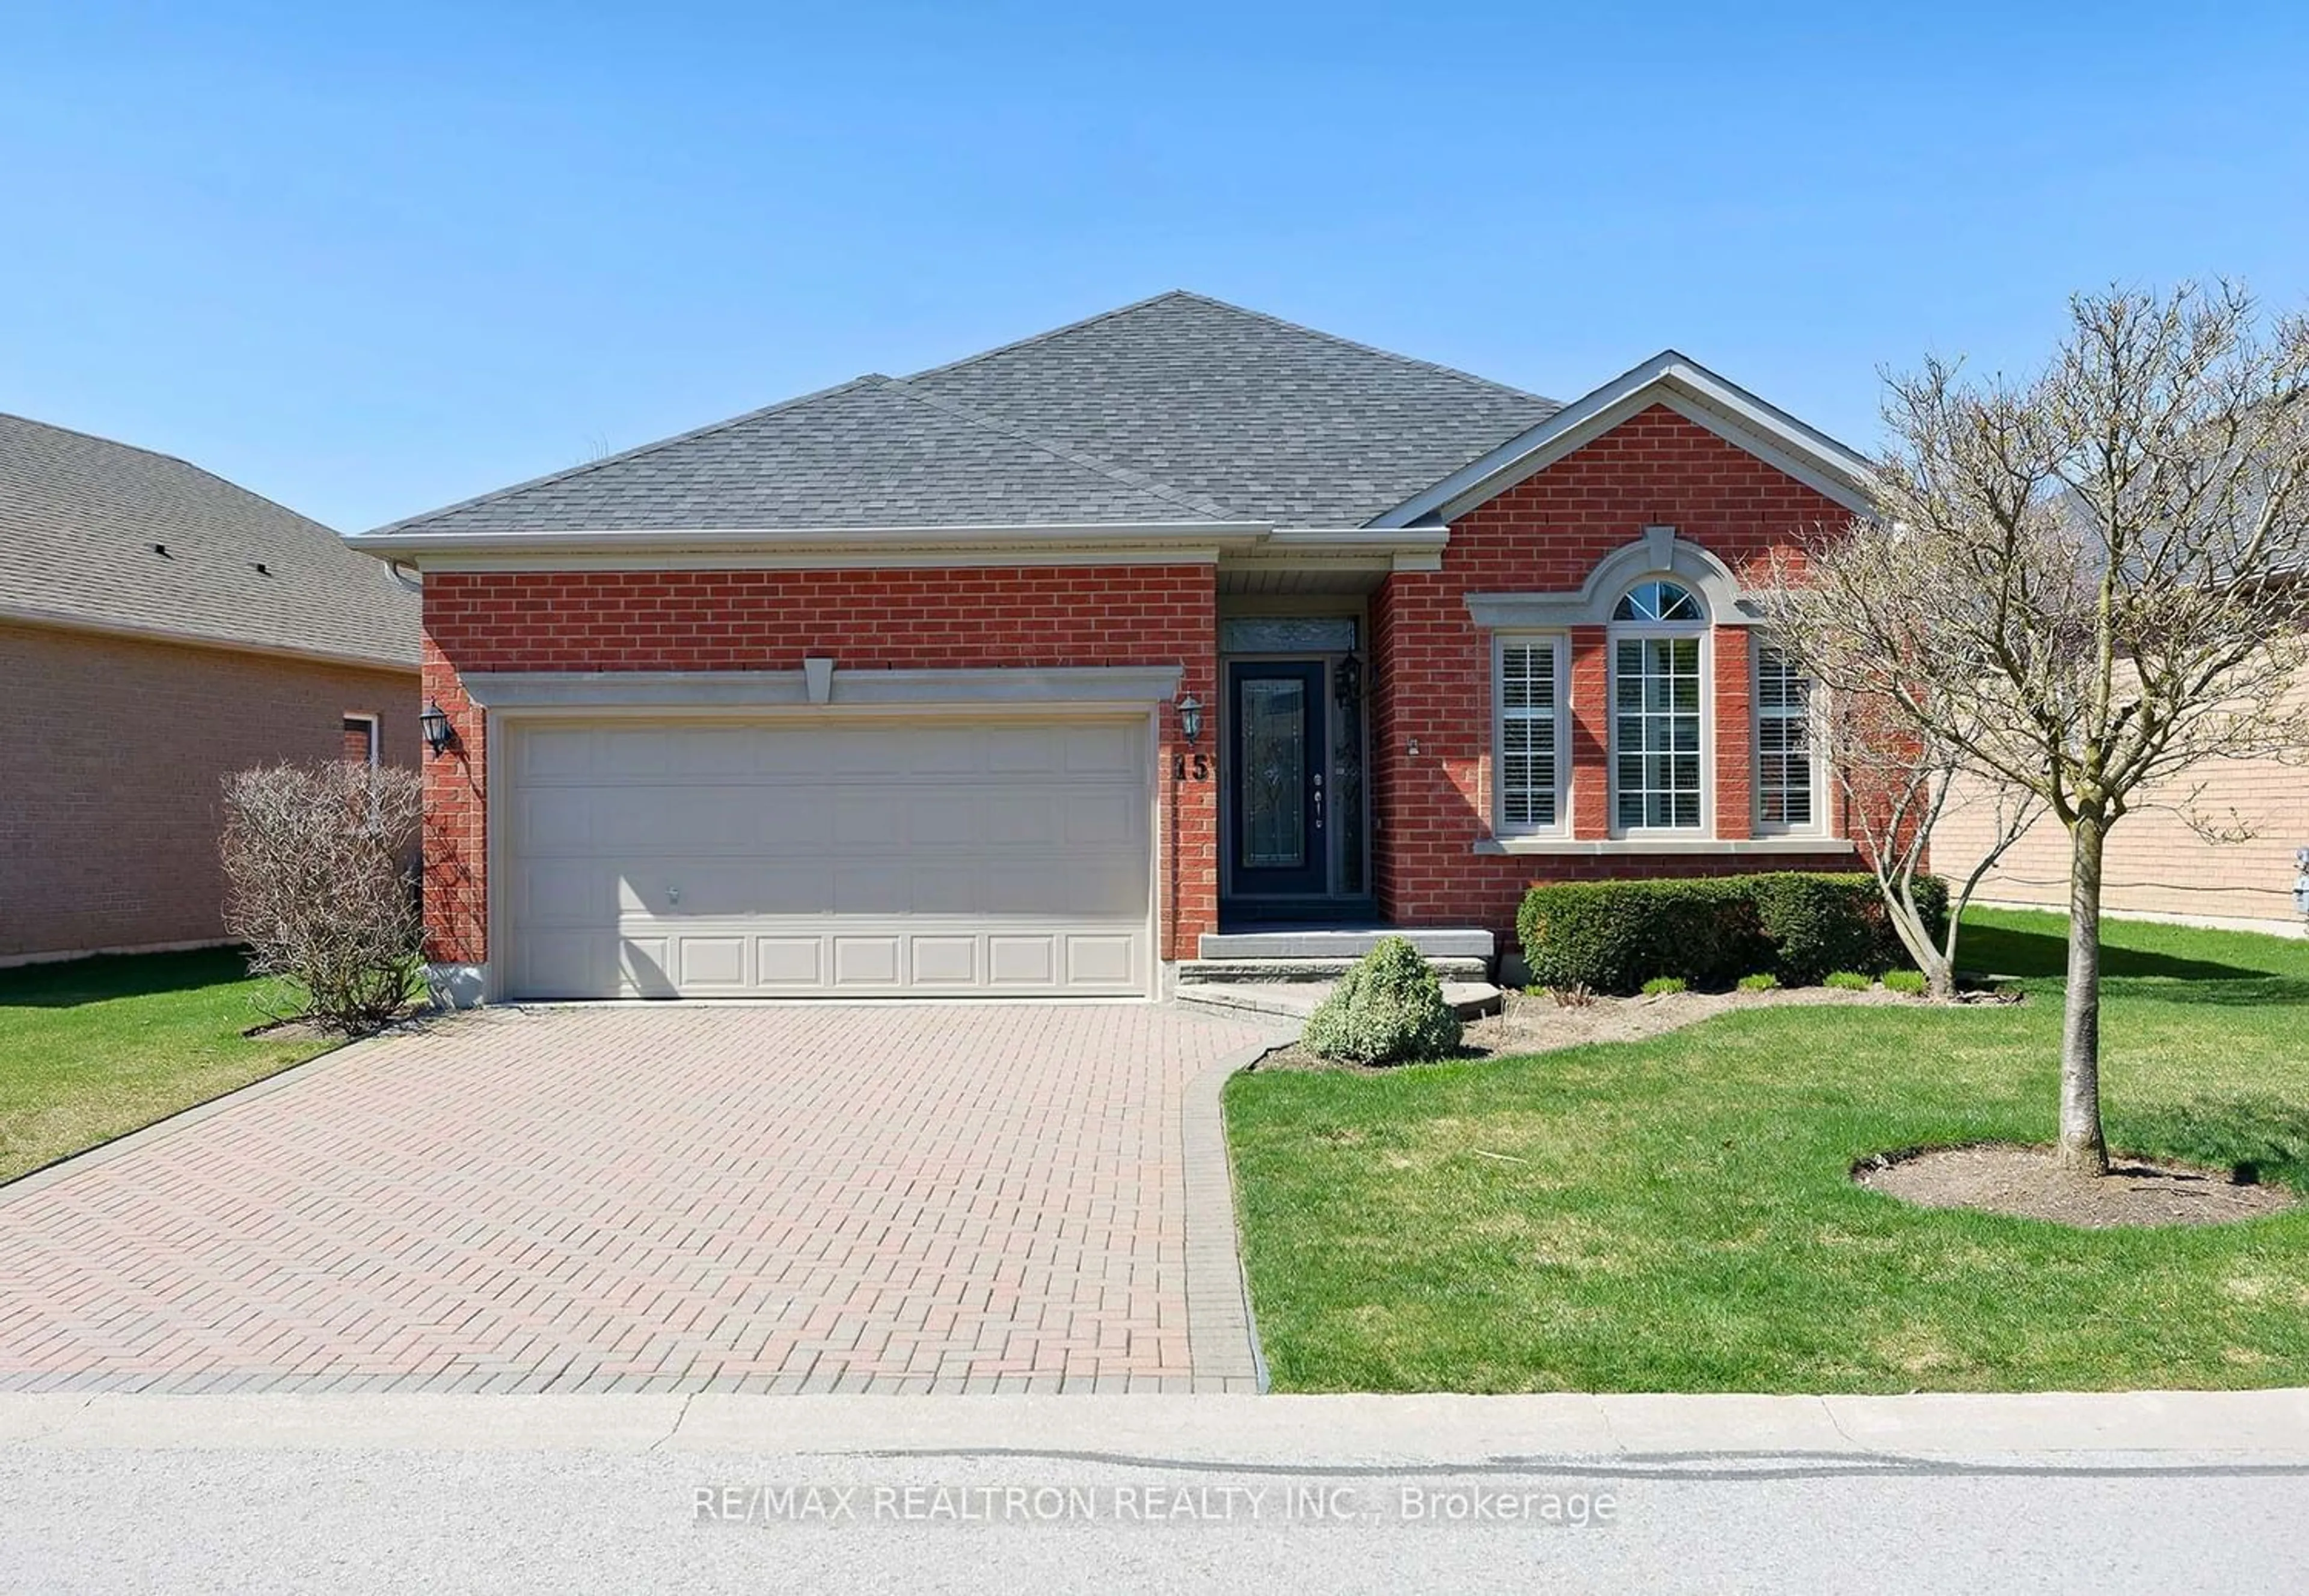 Home with brick exterior material for 15 Morris Belt, Whitchurch-Stouffville Ontario L4A 1R5